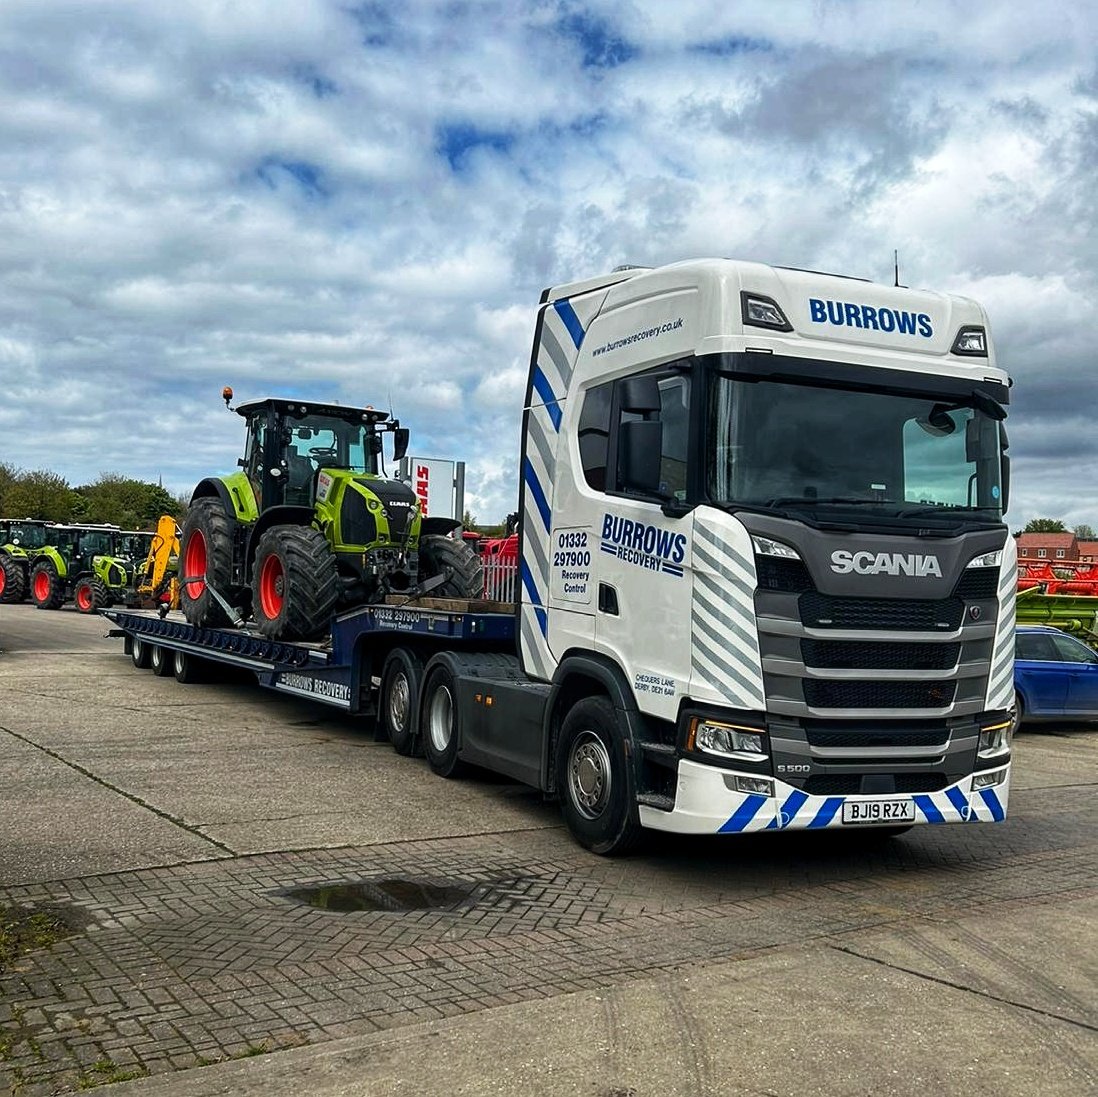 Harrison in the Scania S500 low loader on an agricultural mission, with a Claas tractor on board. 💚
#burrowsrecovery